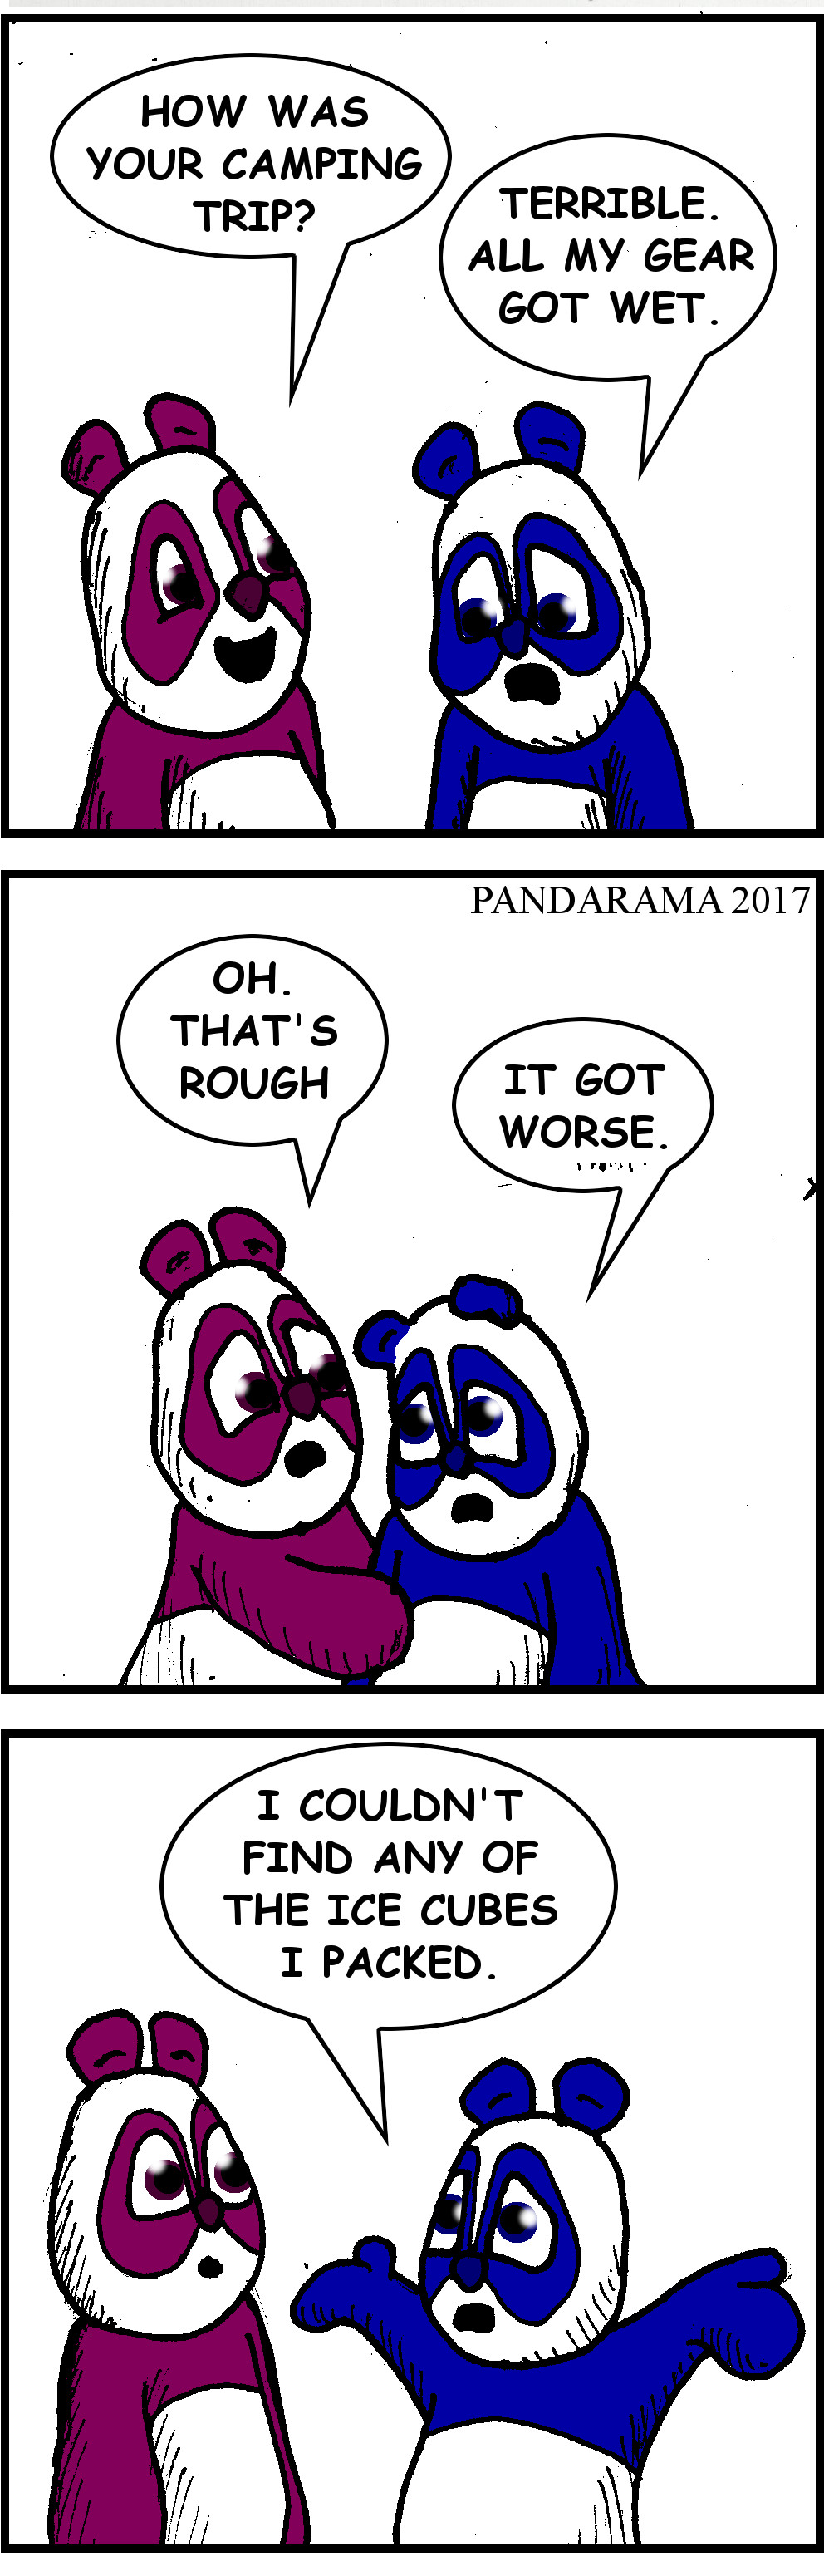 bad camping trip because gear got wet and camper couldn't find icecubes the camper packed. panda camping comicstrip. 